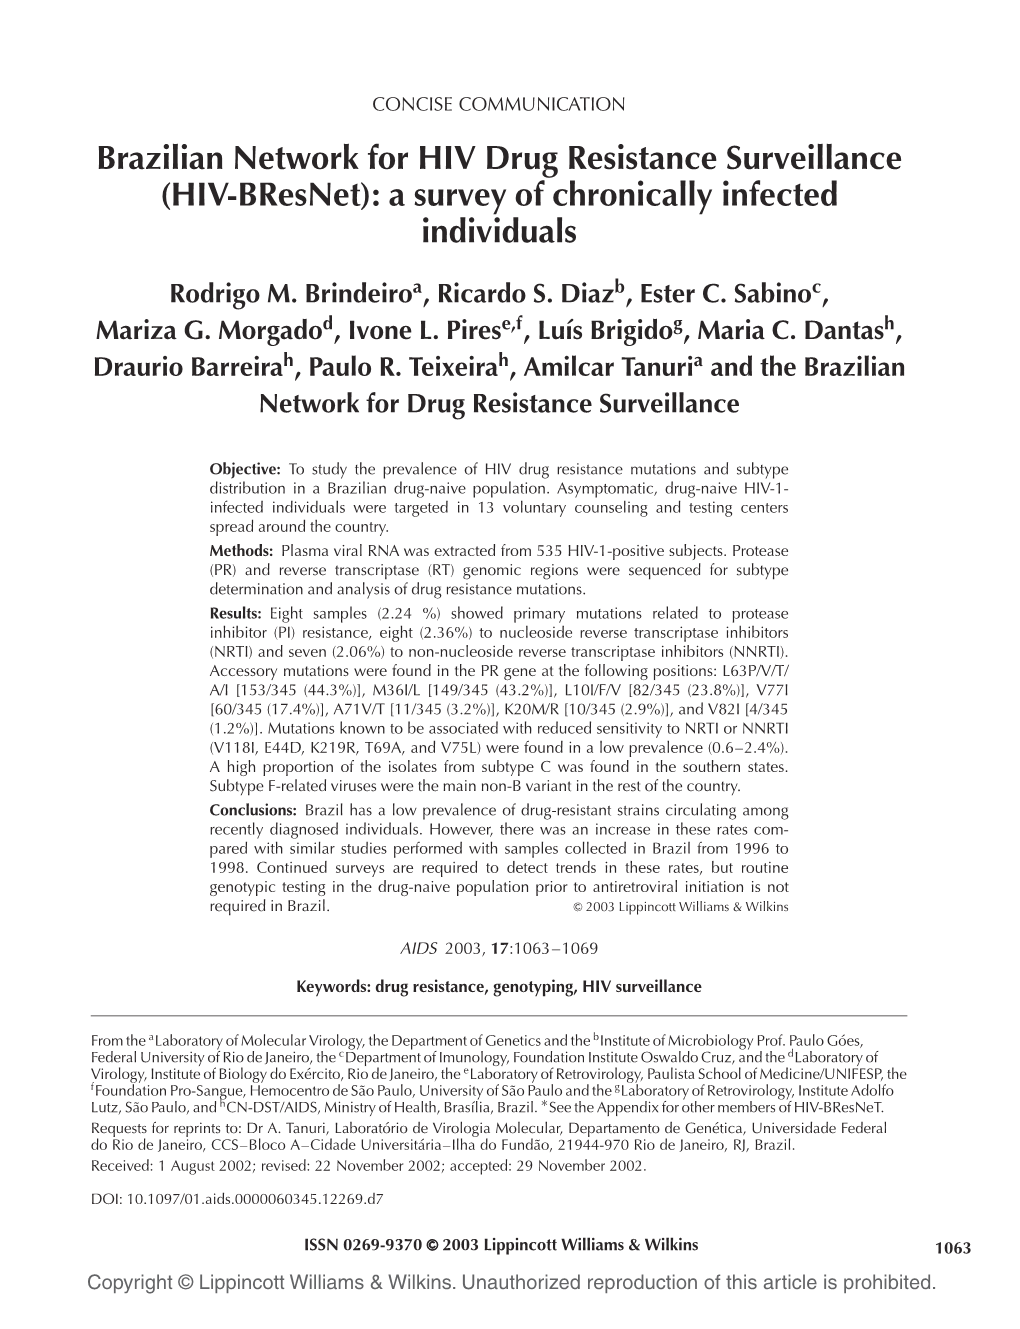 (HIV-Bresnet): a Survey of Chronically Infected Individuals